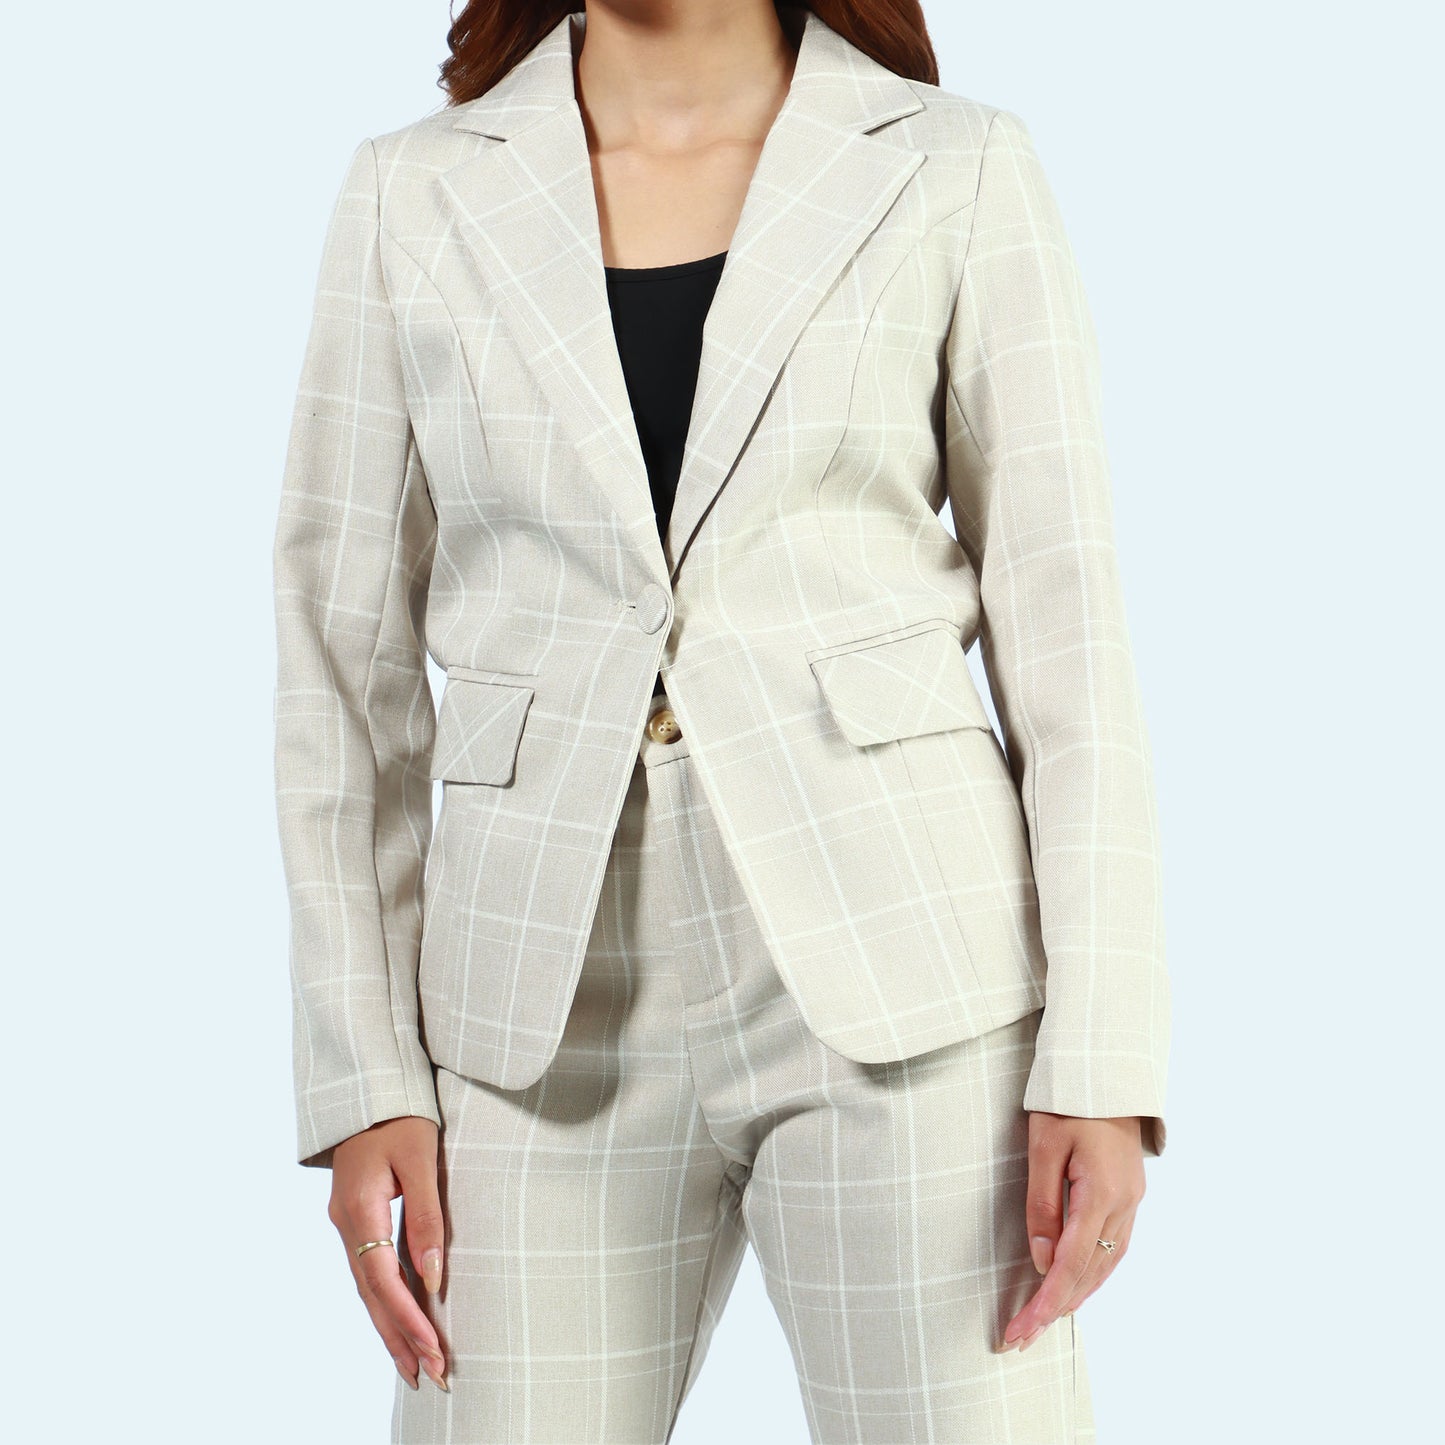 Cream Light Single Button Formal Checked Coat And Pant Set For Women